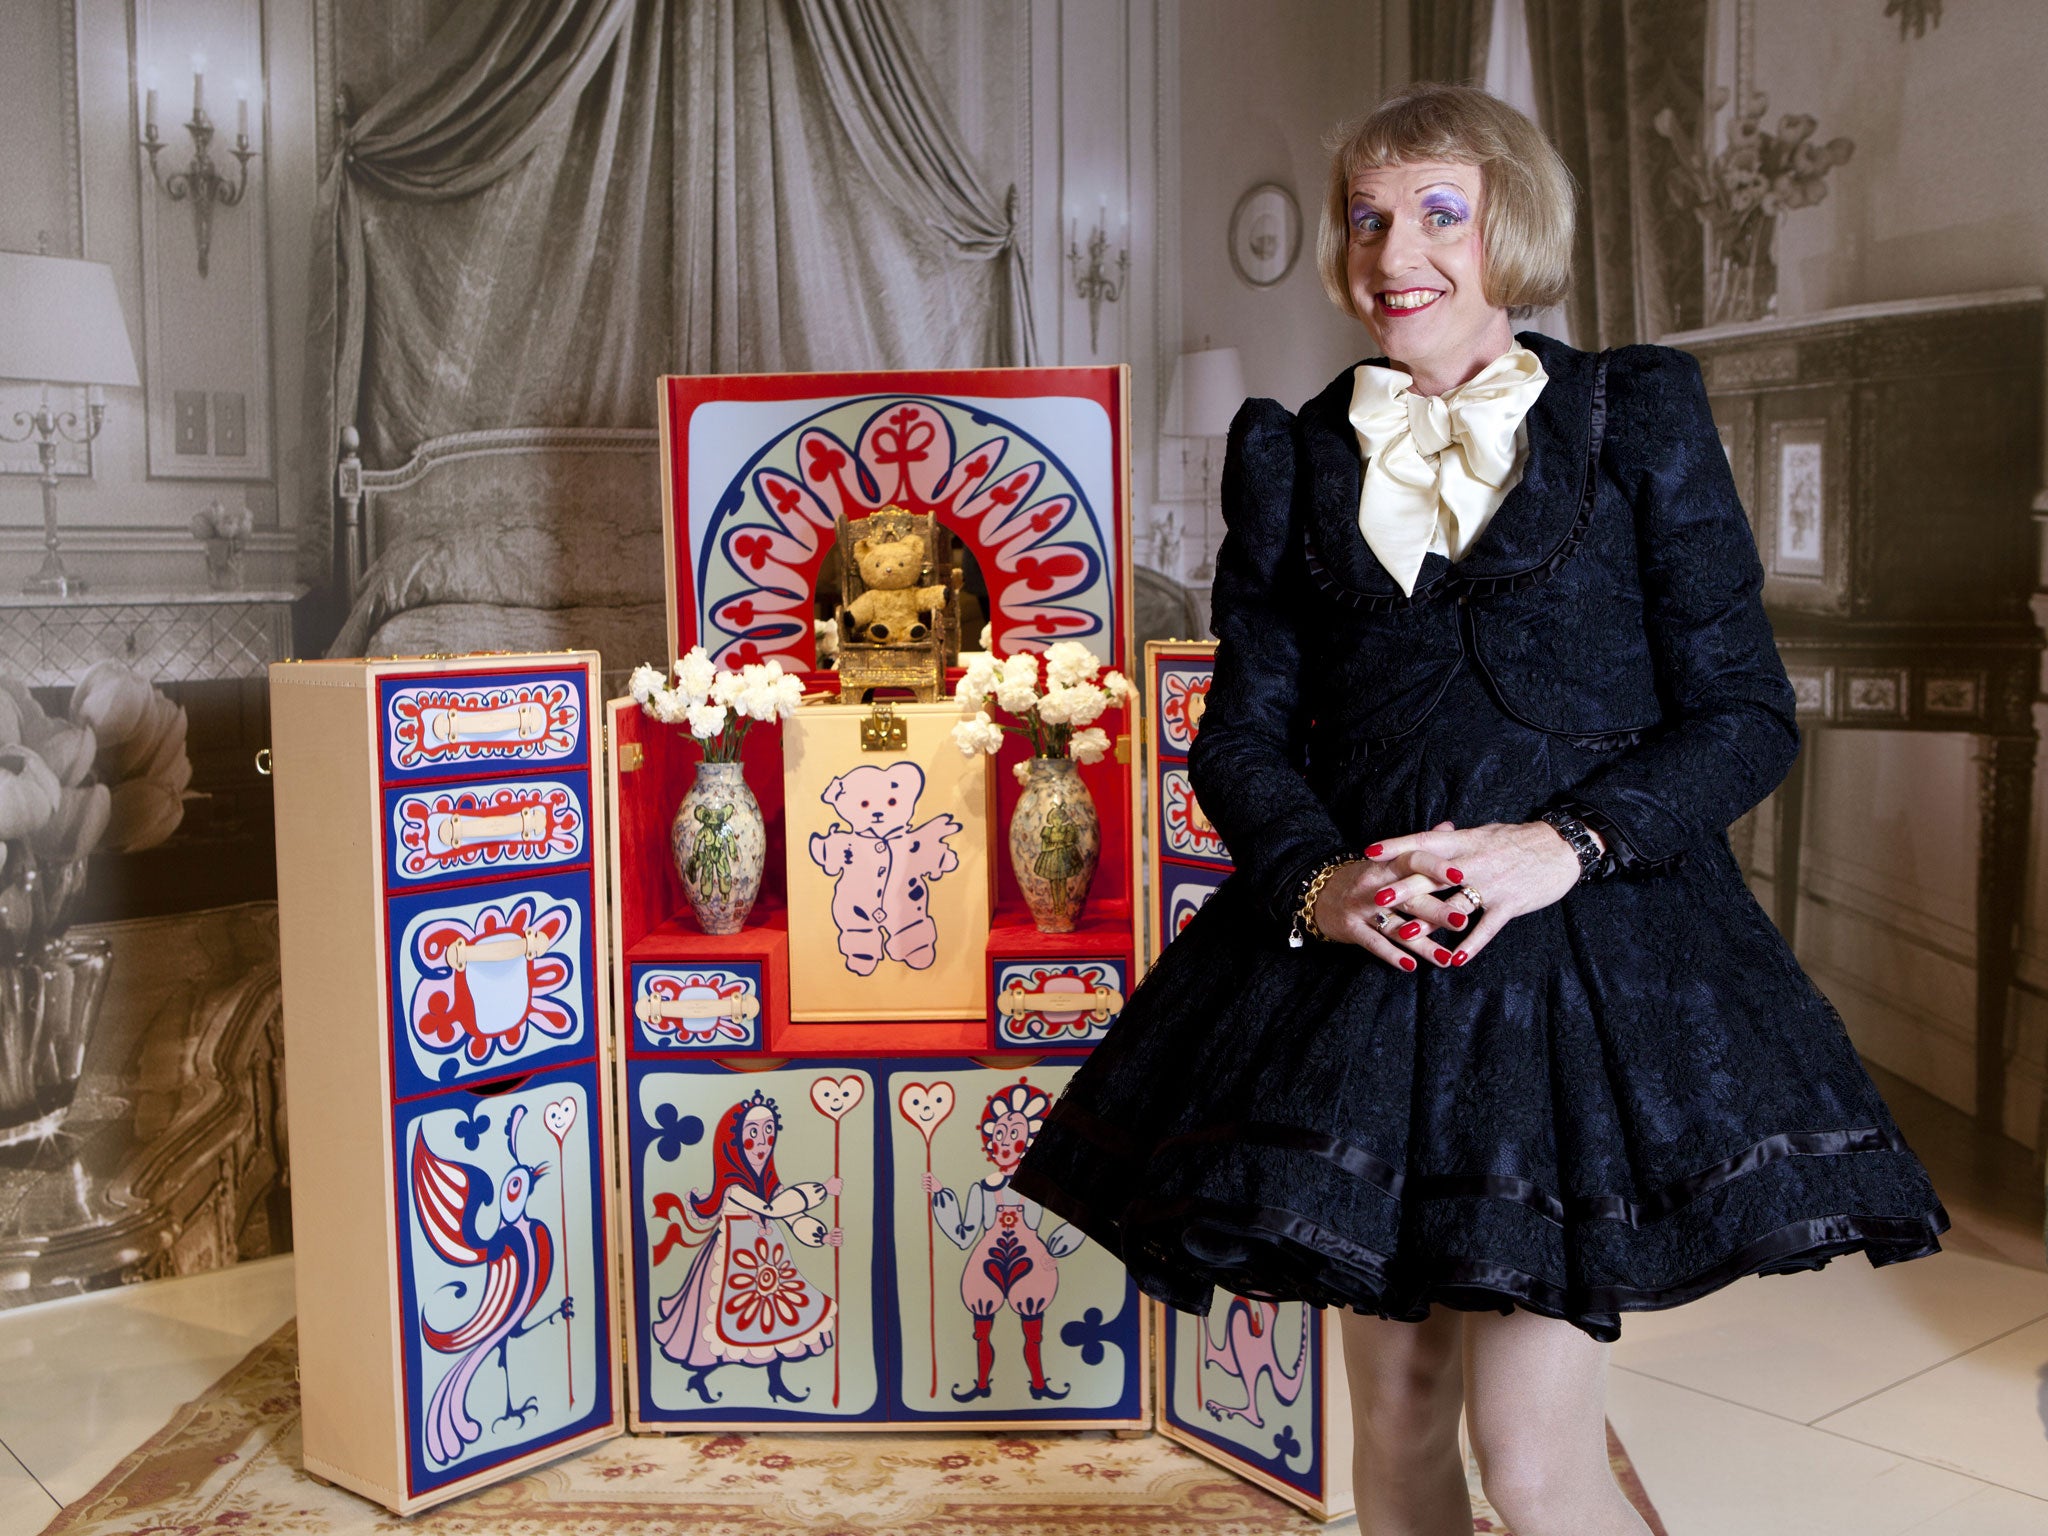 Outfits designed for Grayson Perry's alter ego Claire up for